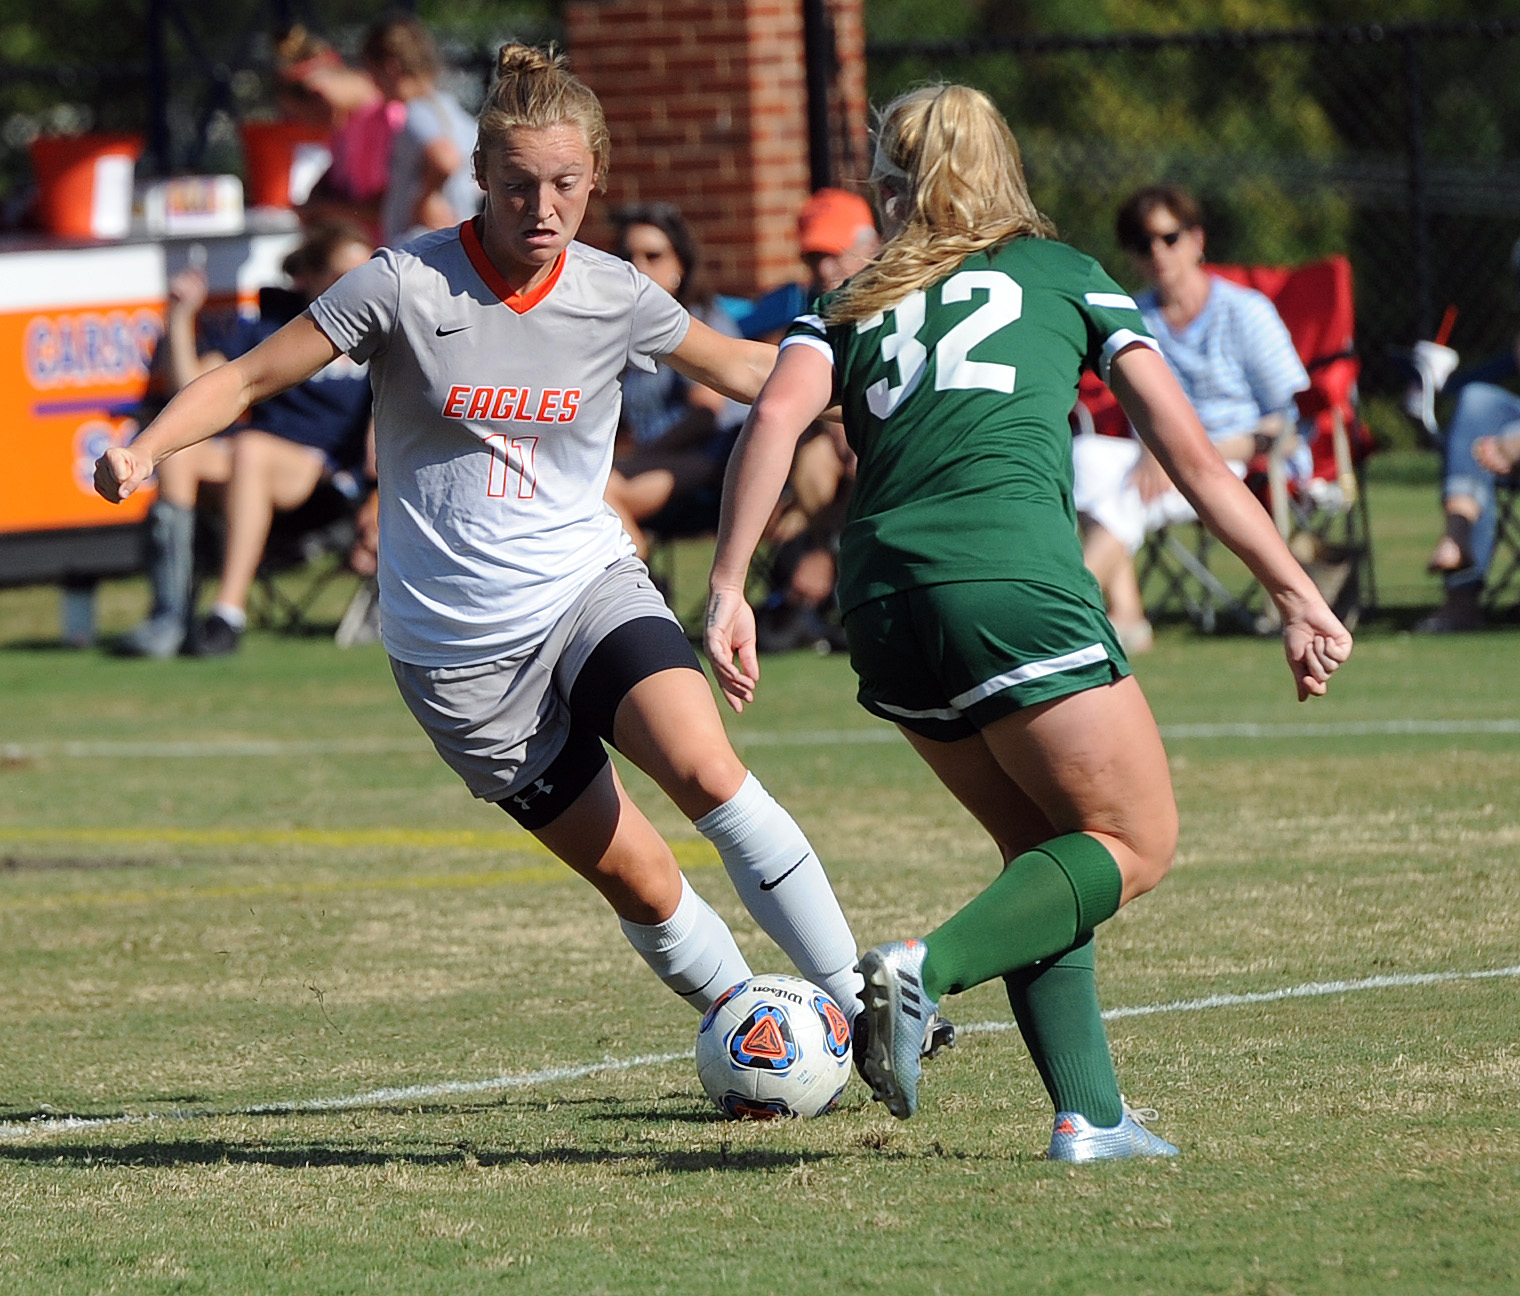 Wade's hat trick keys Eagles in 4-2 win over Tusculum